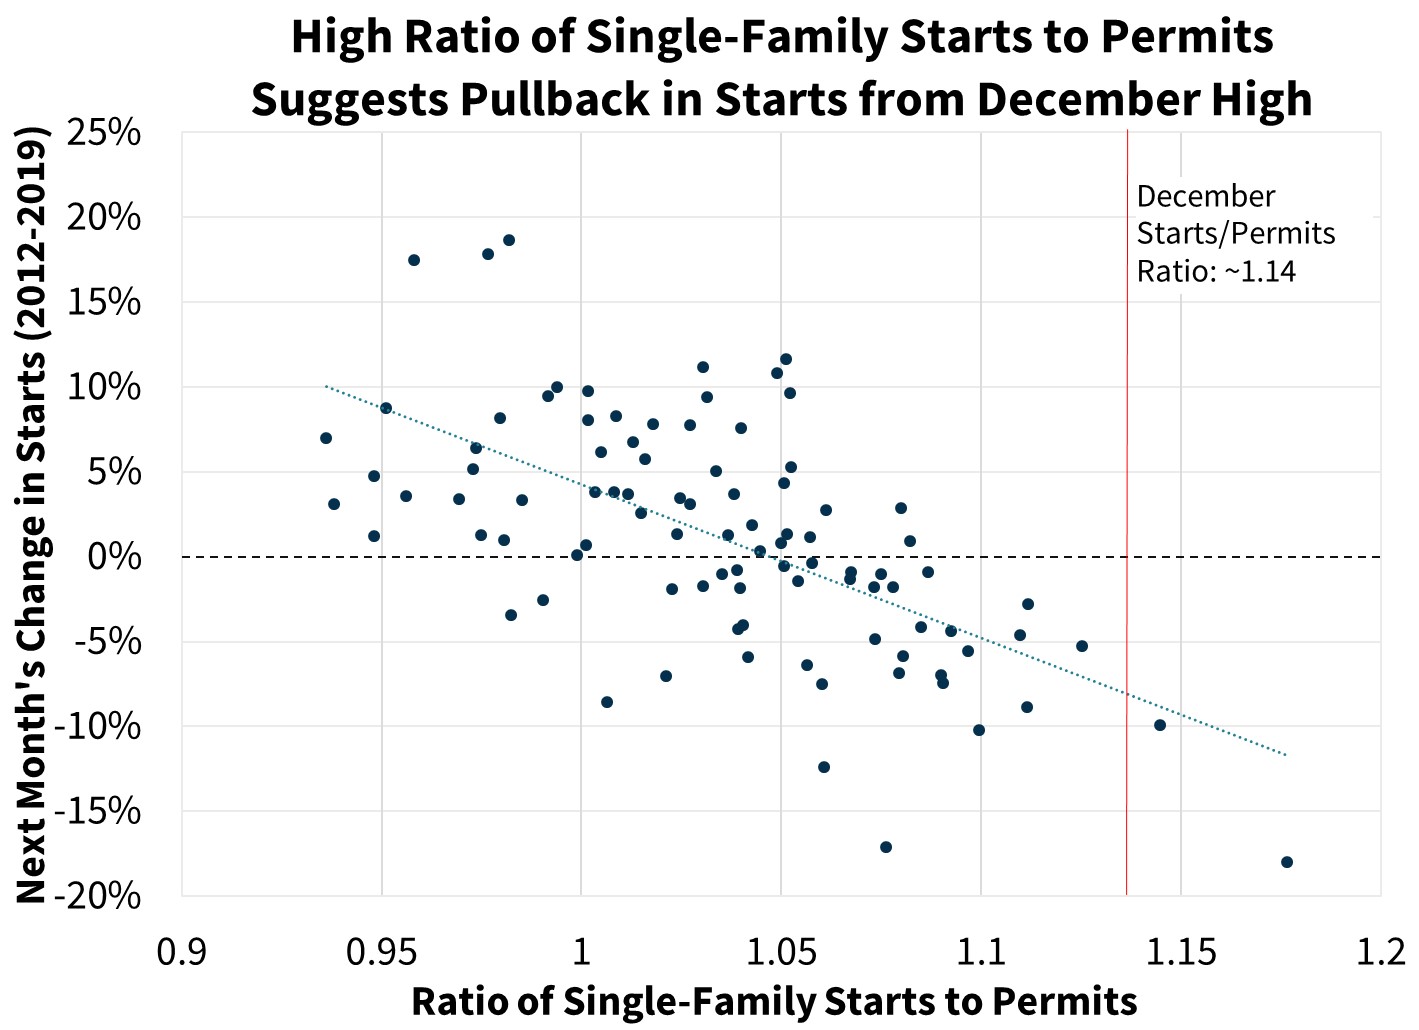 High Ratio of Single-Family Starts to Permits Suggests Pullback in Starts from December High